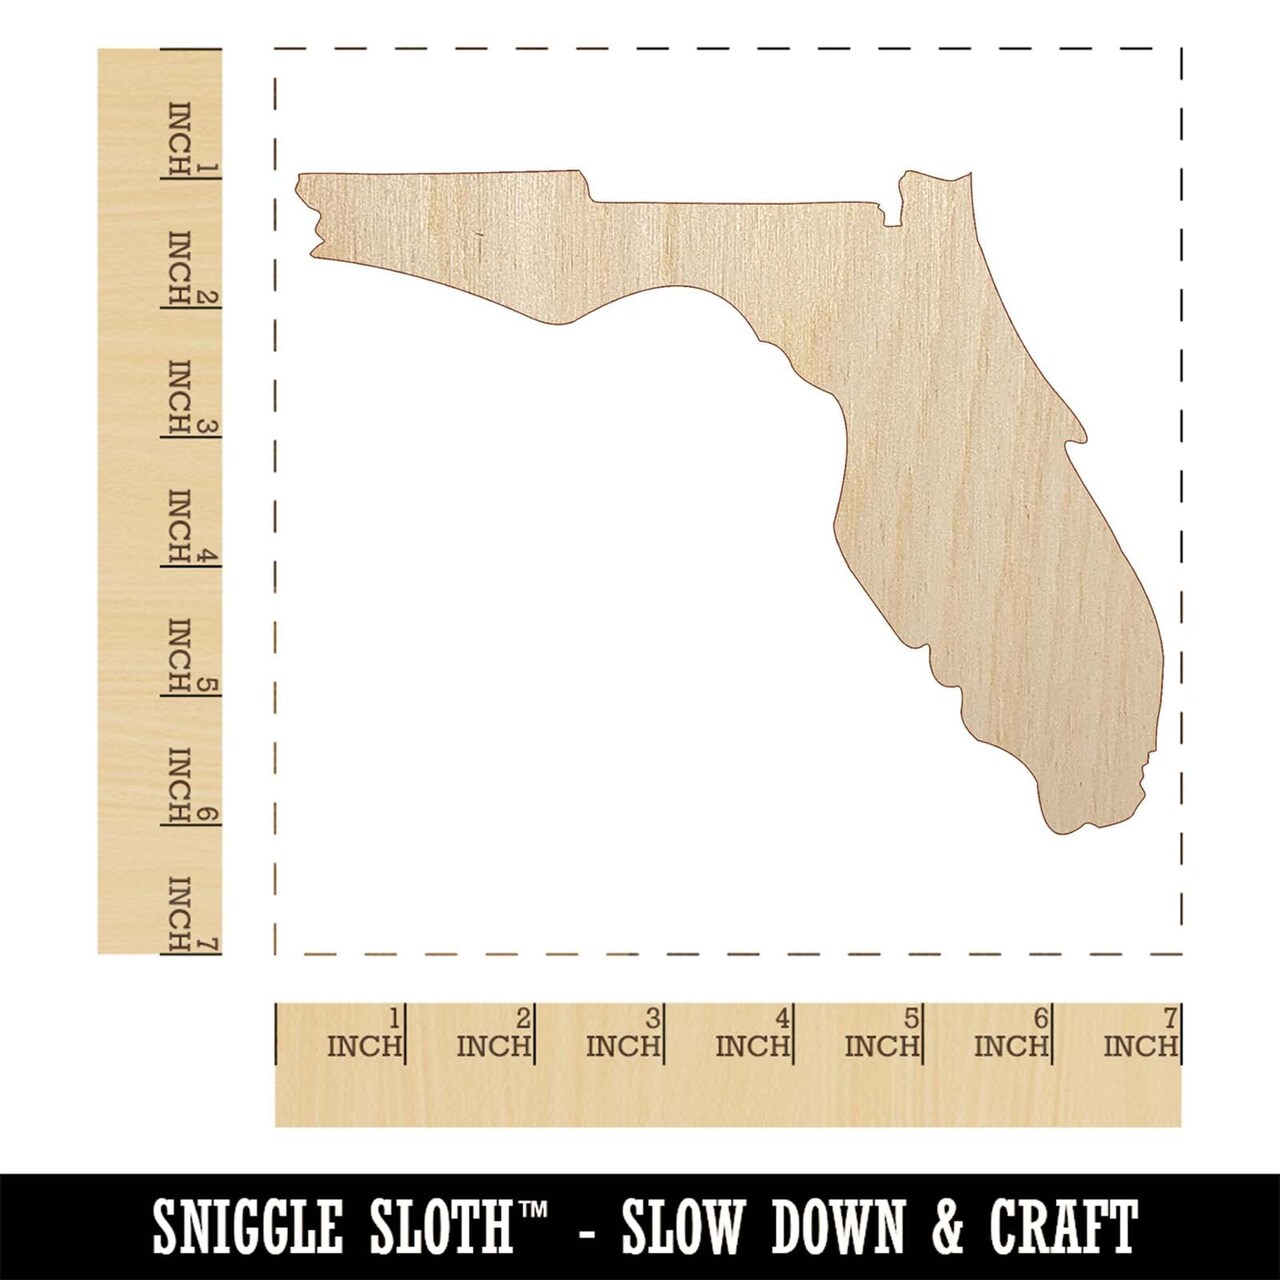 Florida State Silhouette Unfinished Wood Shape Piece Cutout for DIY Craft Projects